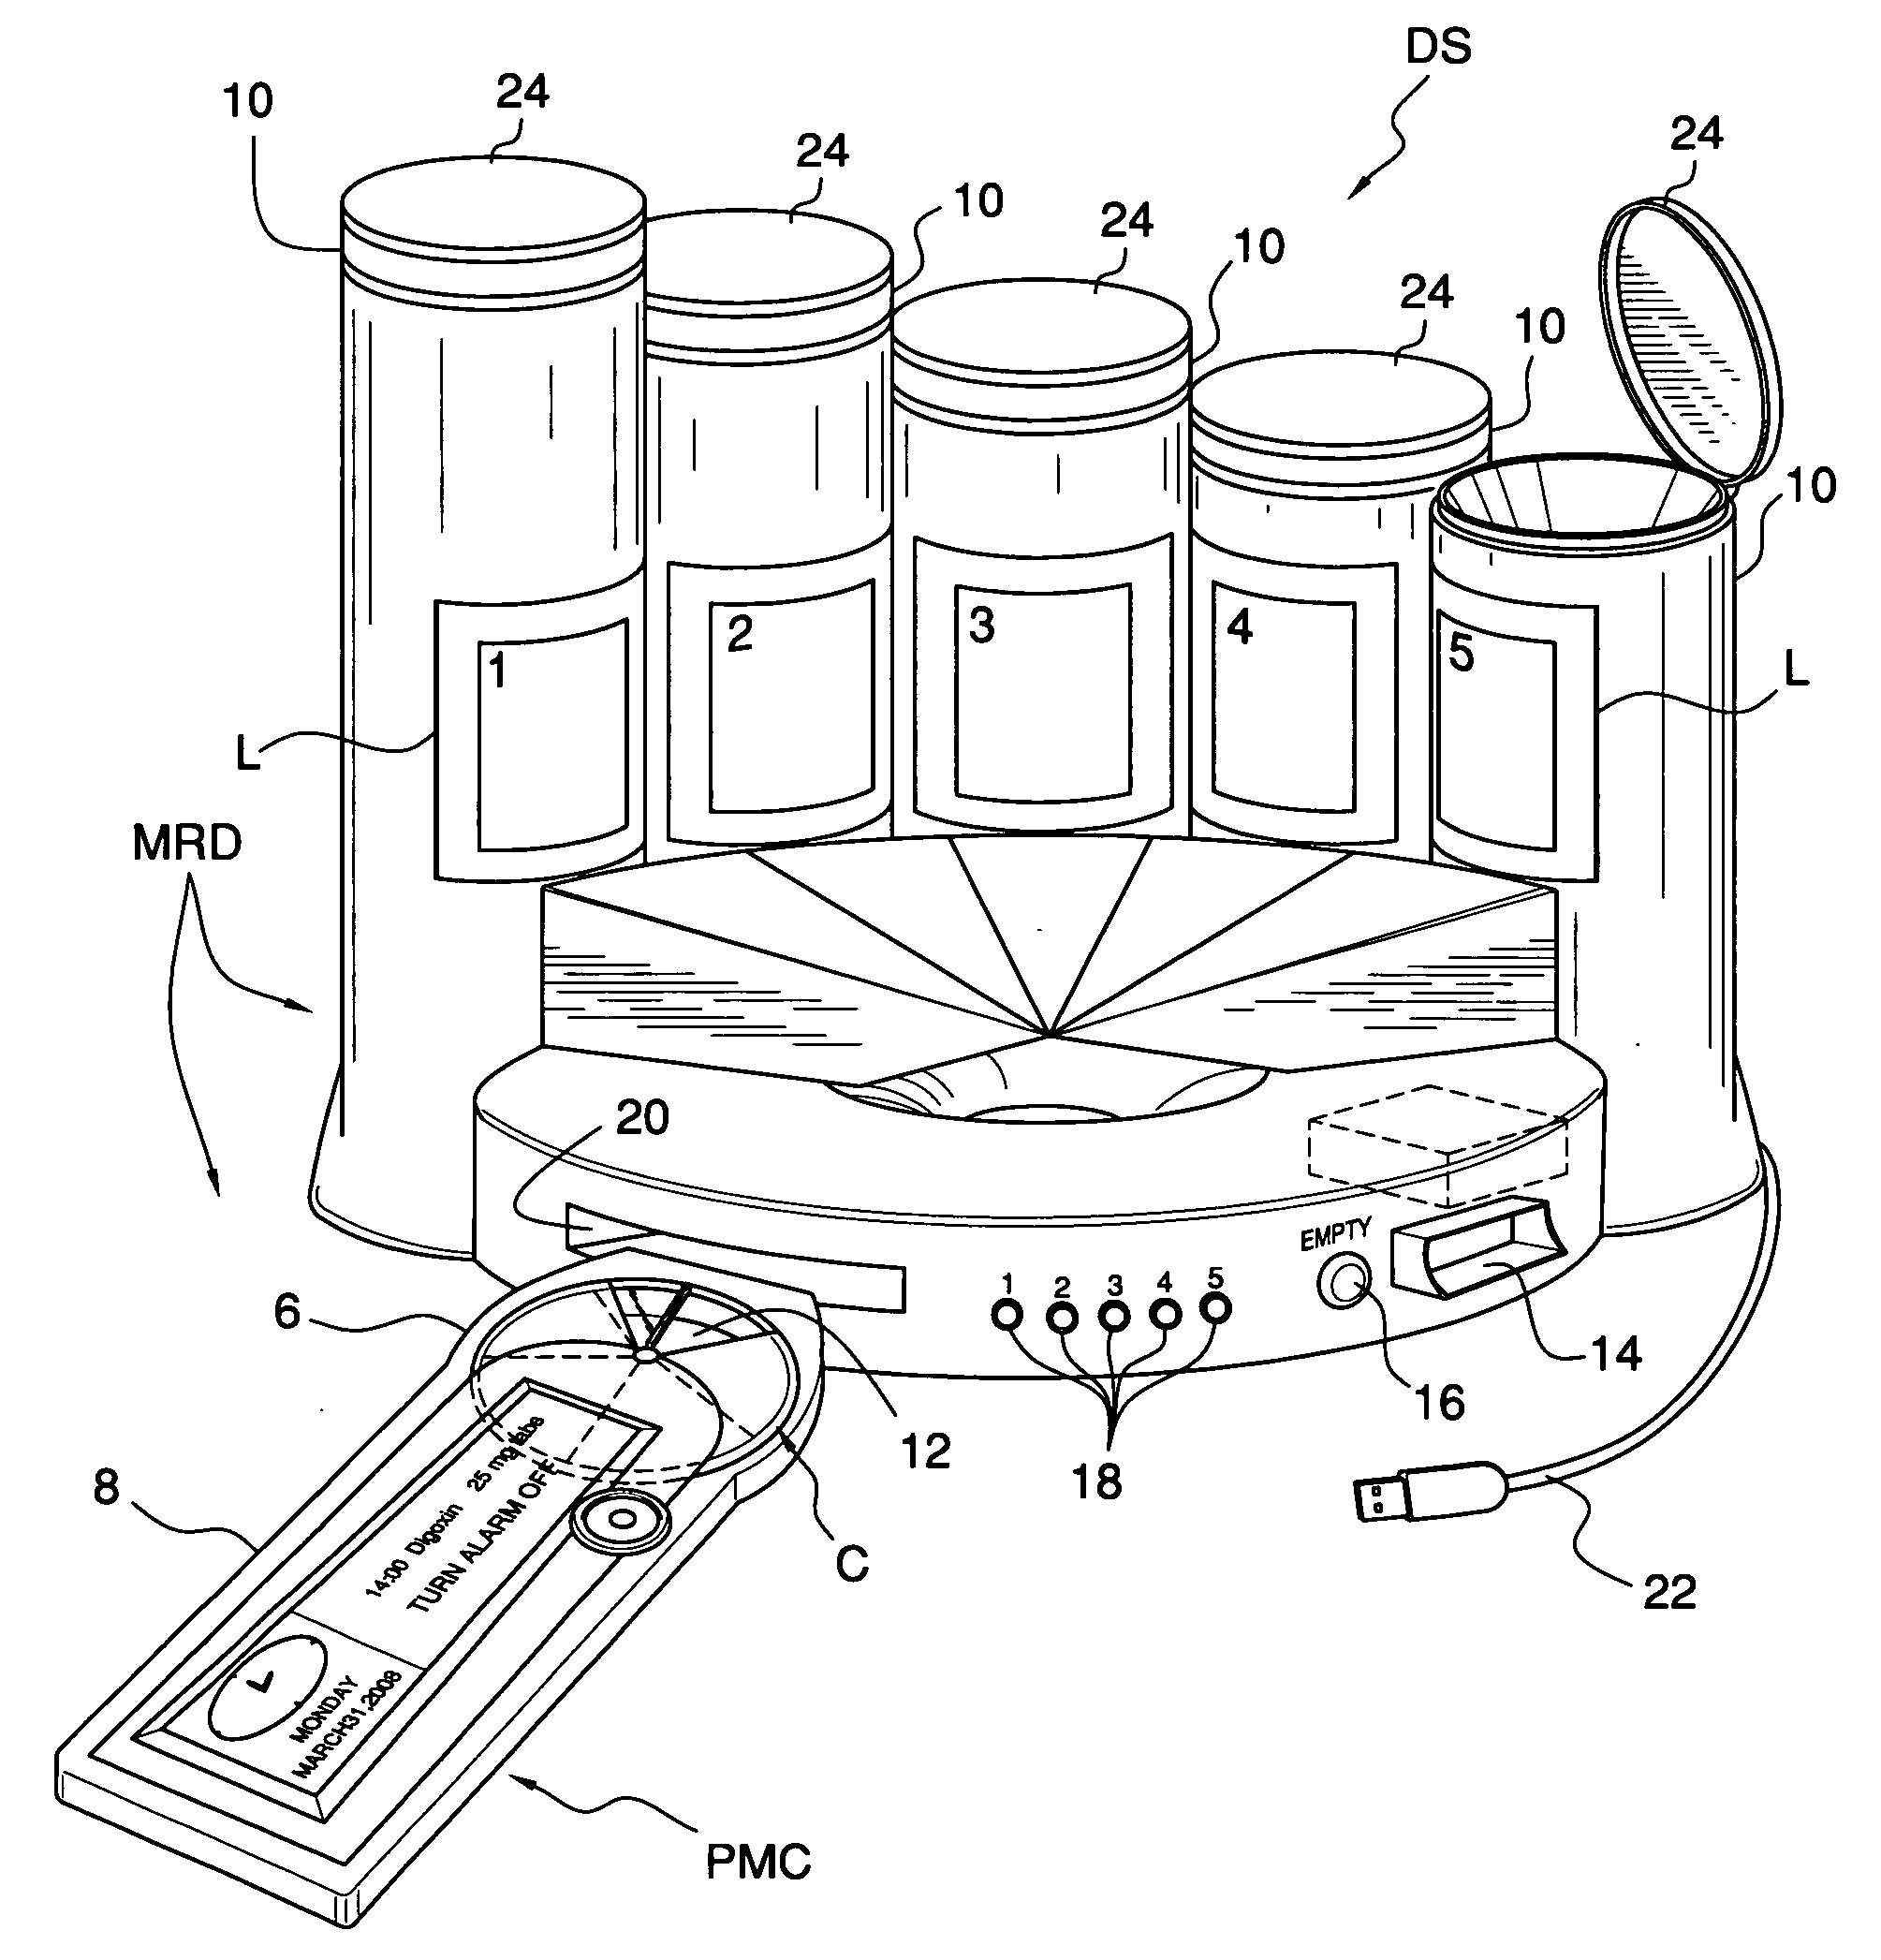 Automatic medication reminder and dispensing device, system , and method therefor